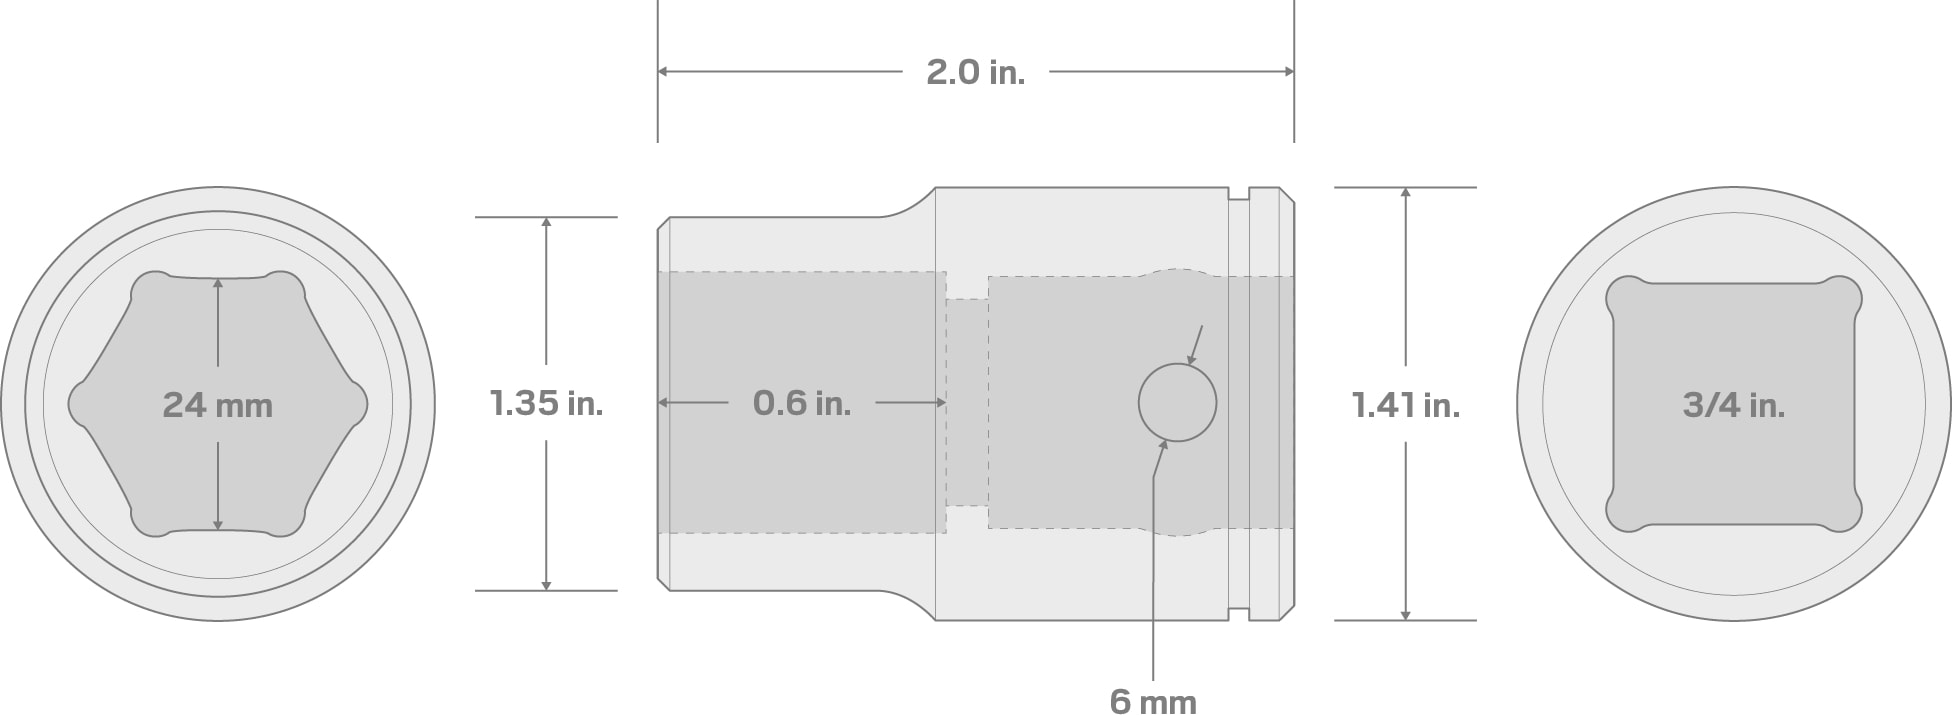 Specs for 3/4 Inch Drive x 24 mm 6-Point Socket